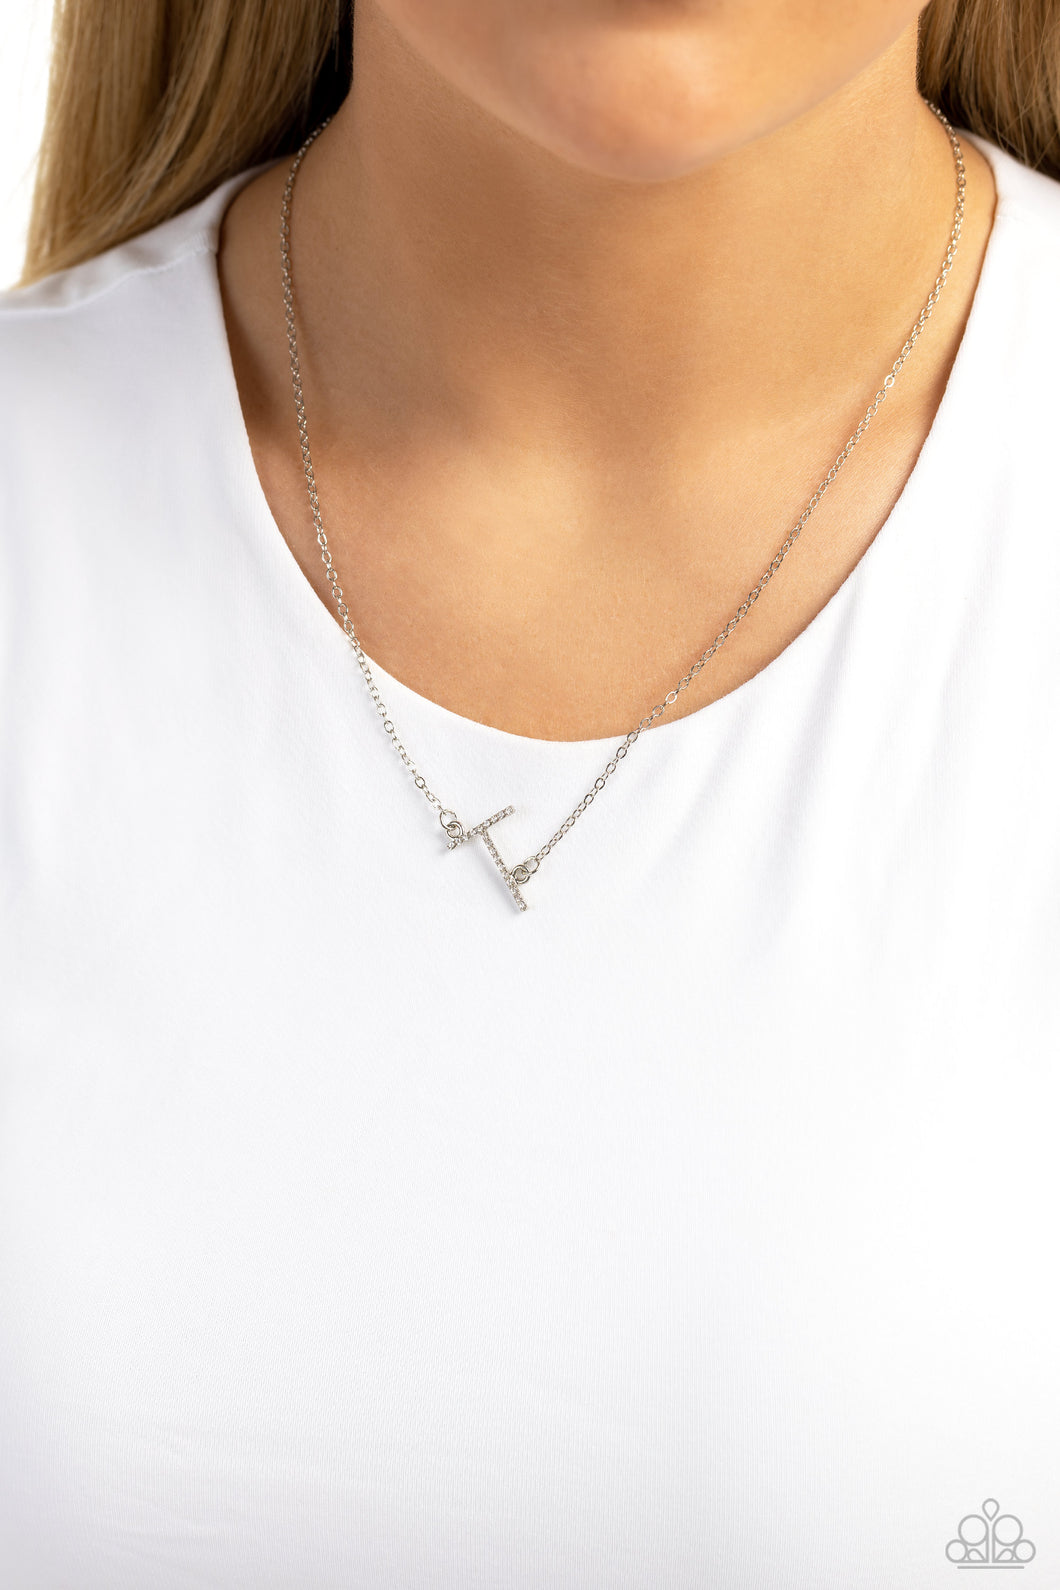 INITIALLY Yours - T - White Paparazzi Necklace